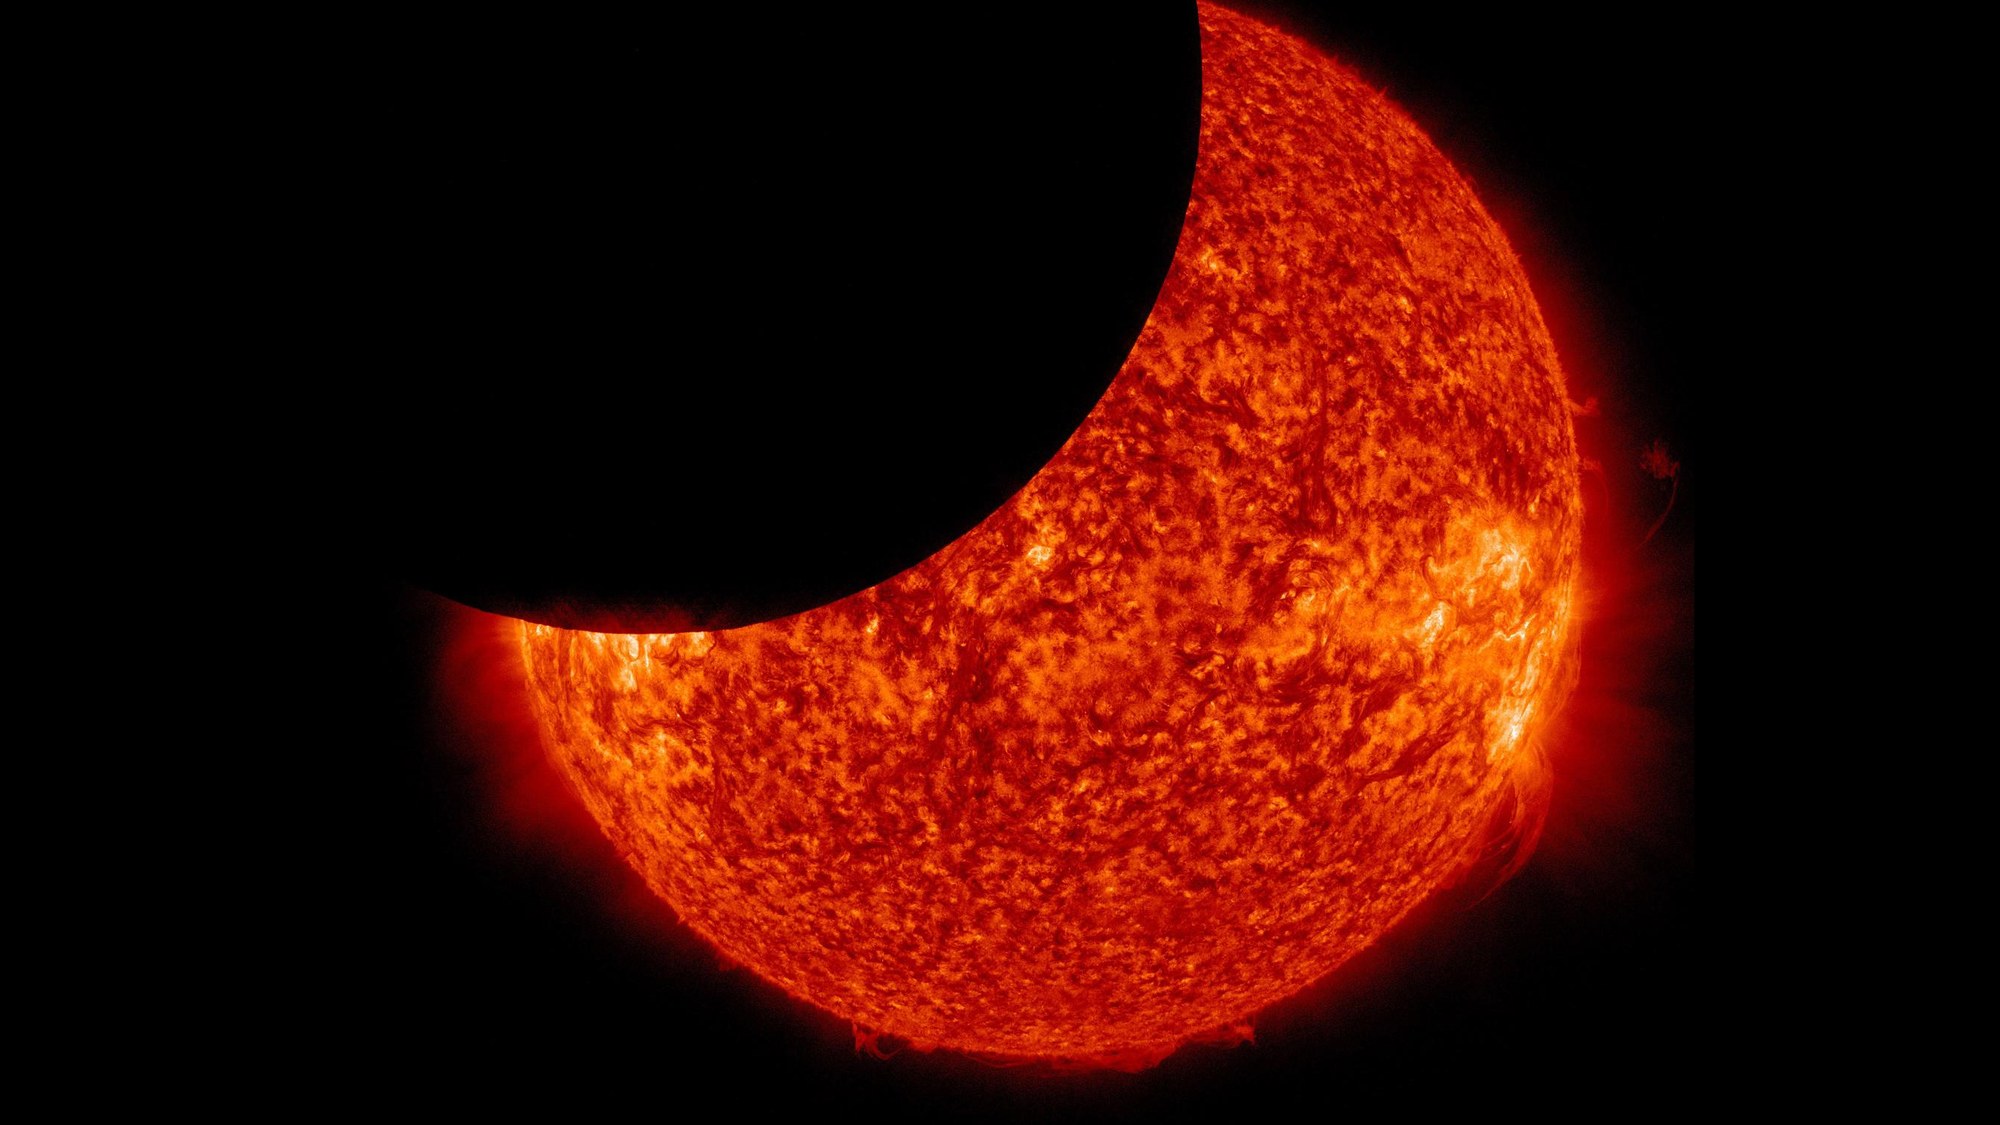 Next Monday, the Moon will pass in front of the Sun when viewed from the USA